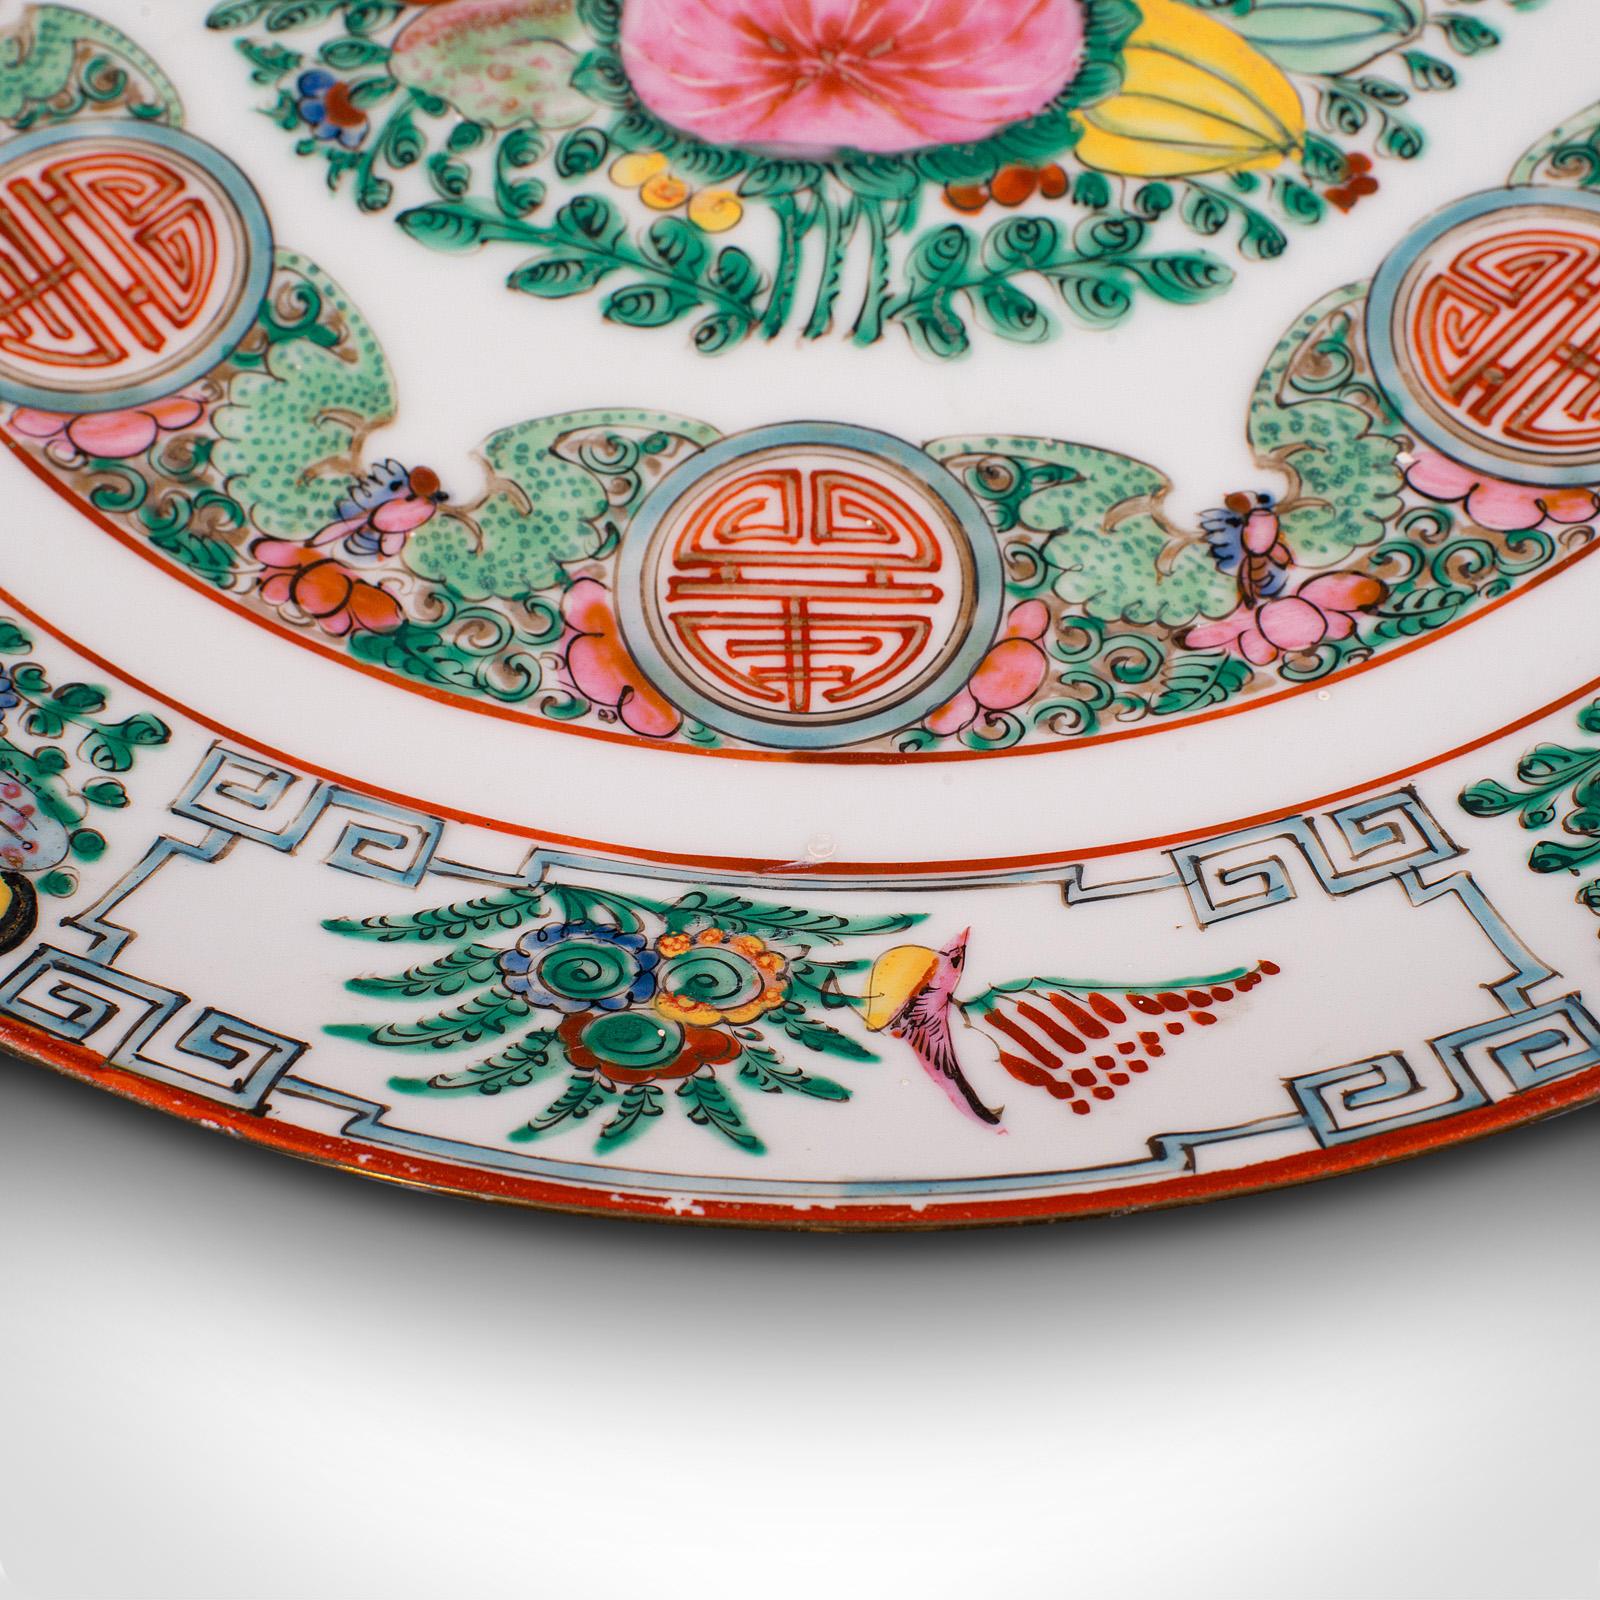 19th Century Antique Celebration Plate, Chinese, Ceramic, Decorative Charger, Victorian, Qing For Sale